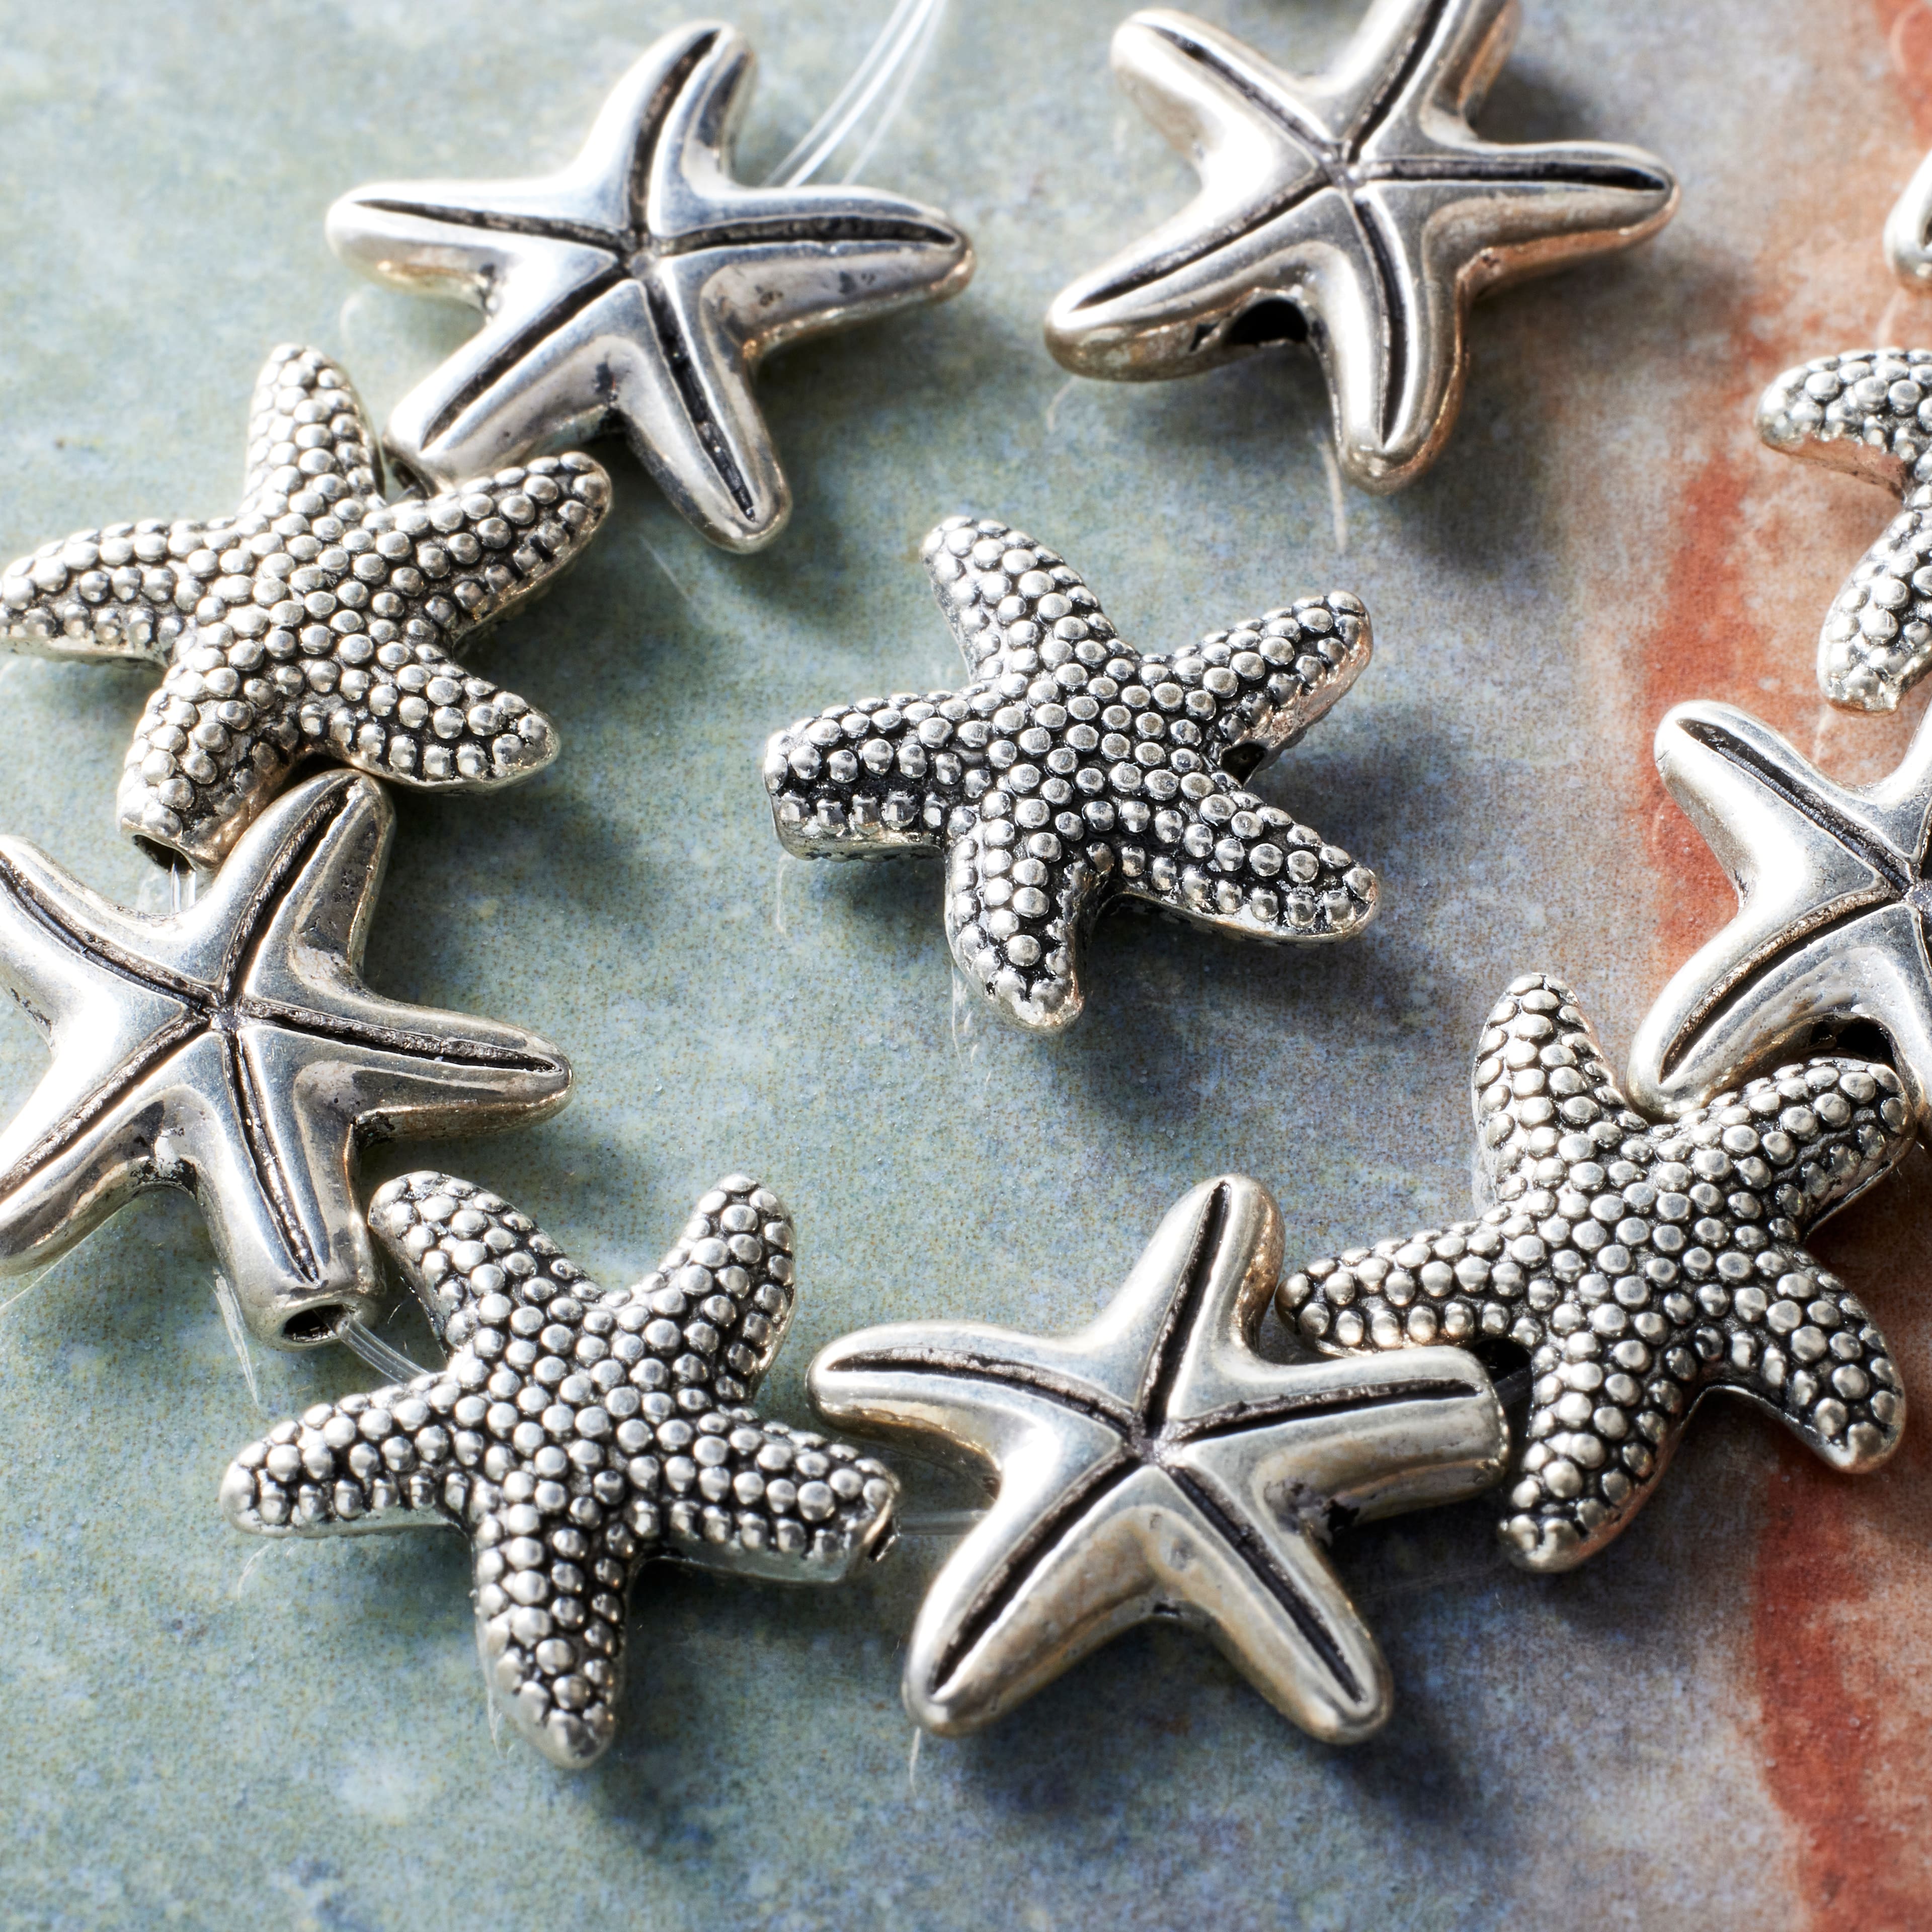 12 Packs: 12 ct. (144 total) Silver Starfish Mix Metal Beads, 14mm by Bead Landing&#x2122;